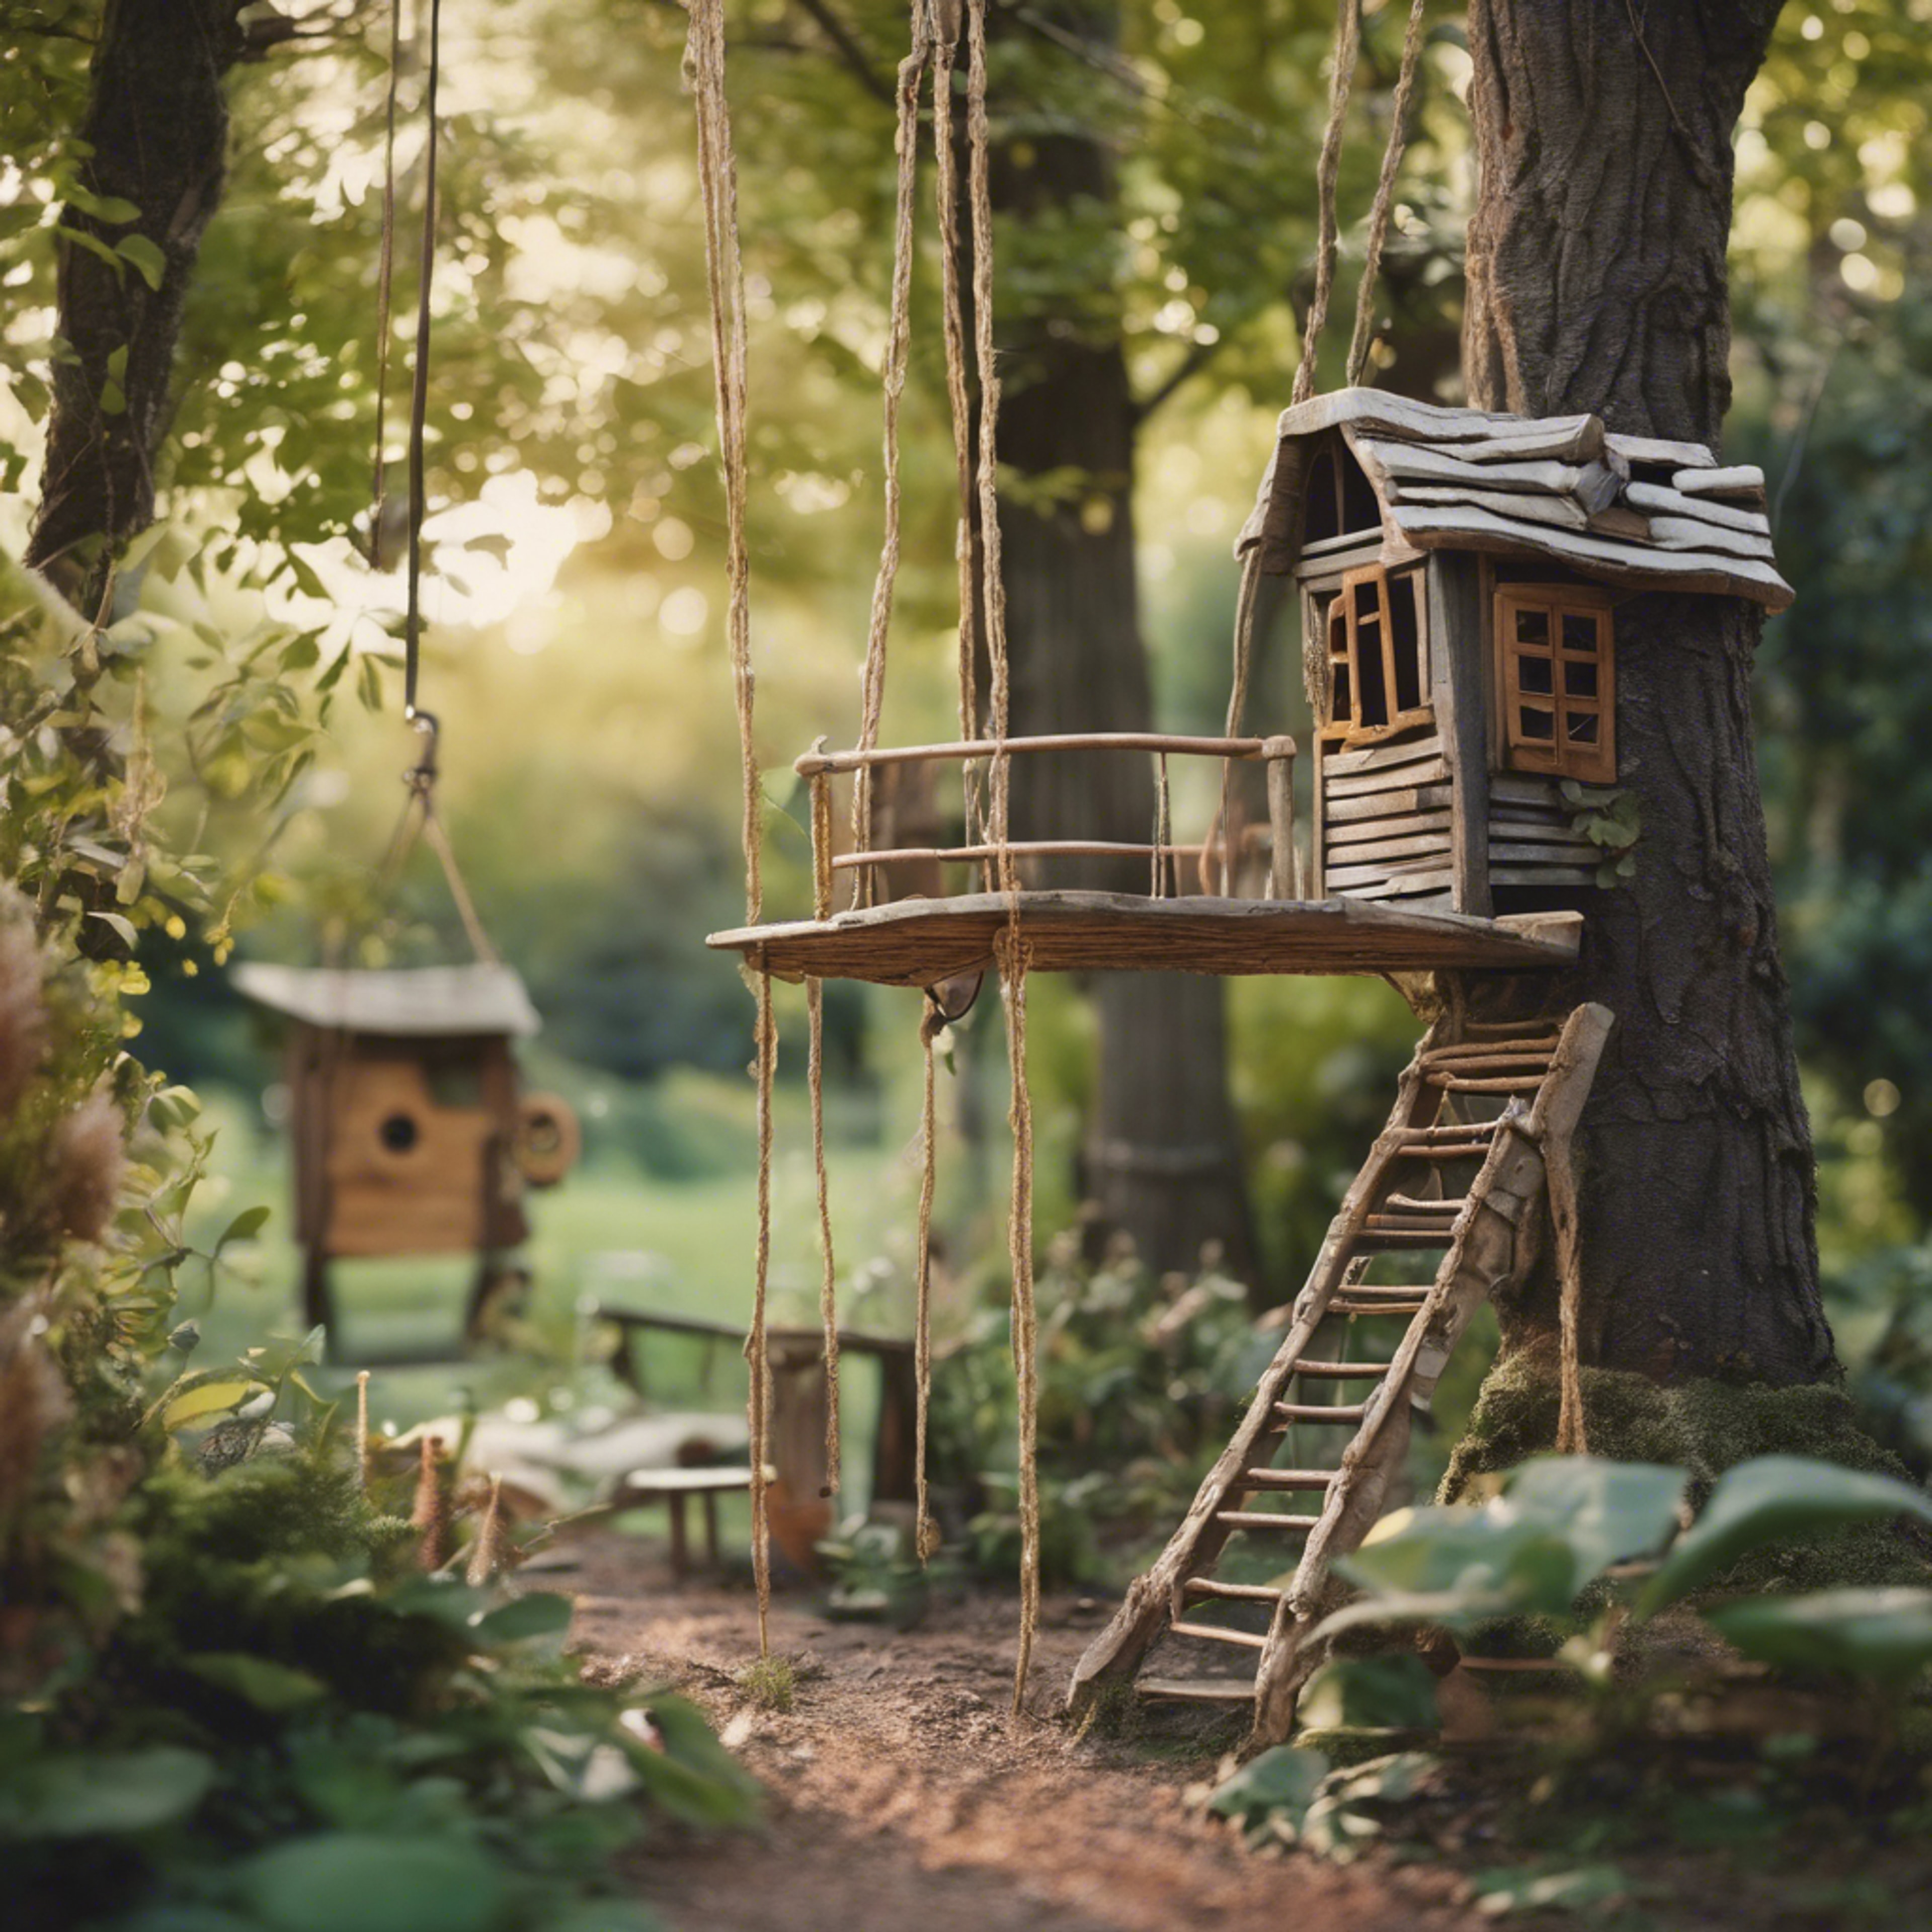 A nostalgic children’s garden filled with hidden treasures, tire swings, and treehouses built amidst towering trees. Ταπετσαρία[4077f42451f34ca69b37]